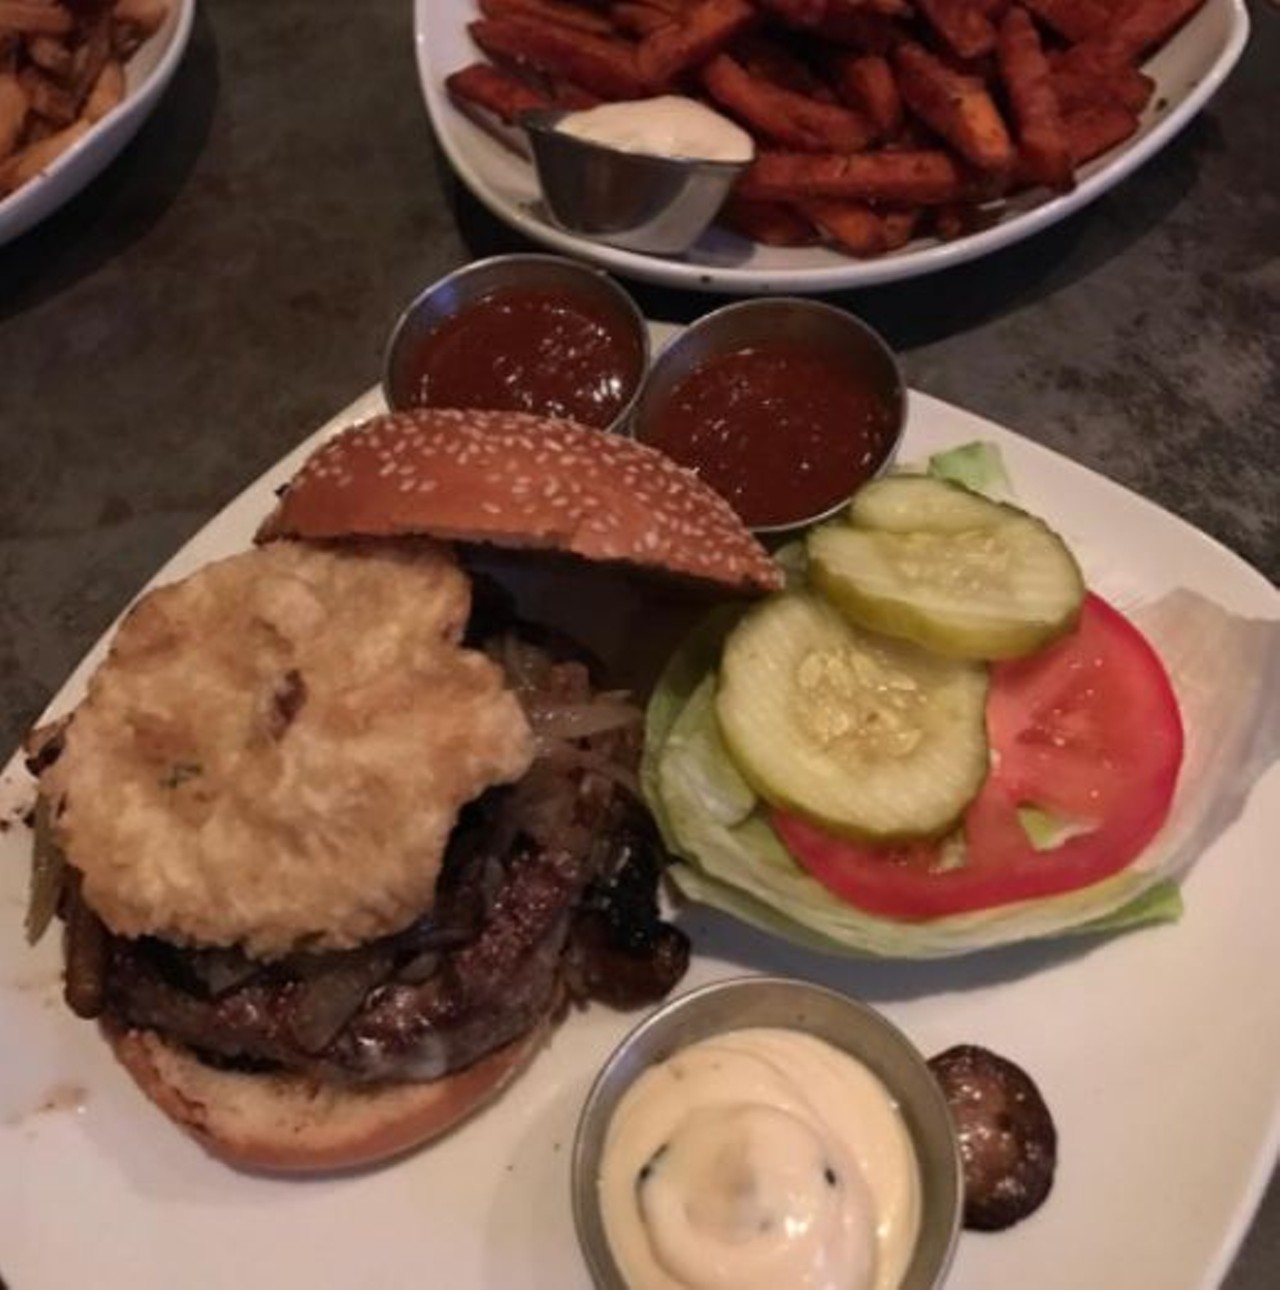  Flip Side
Various locations
Flip Side recently expanded to Colorado, but all its beef is from Ohio (and grass-fed). This chain offers almost 20 burgers, including ones made with lamb, turkey and bison. All of them pair well with its impressive, optionally spiked milkshake menu.
Photo via haute5/Instagram